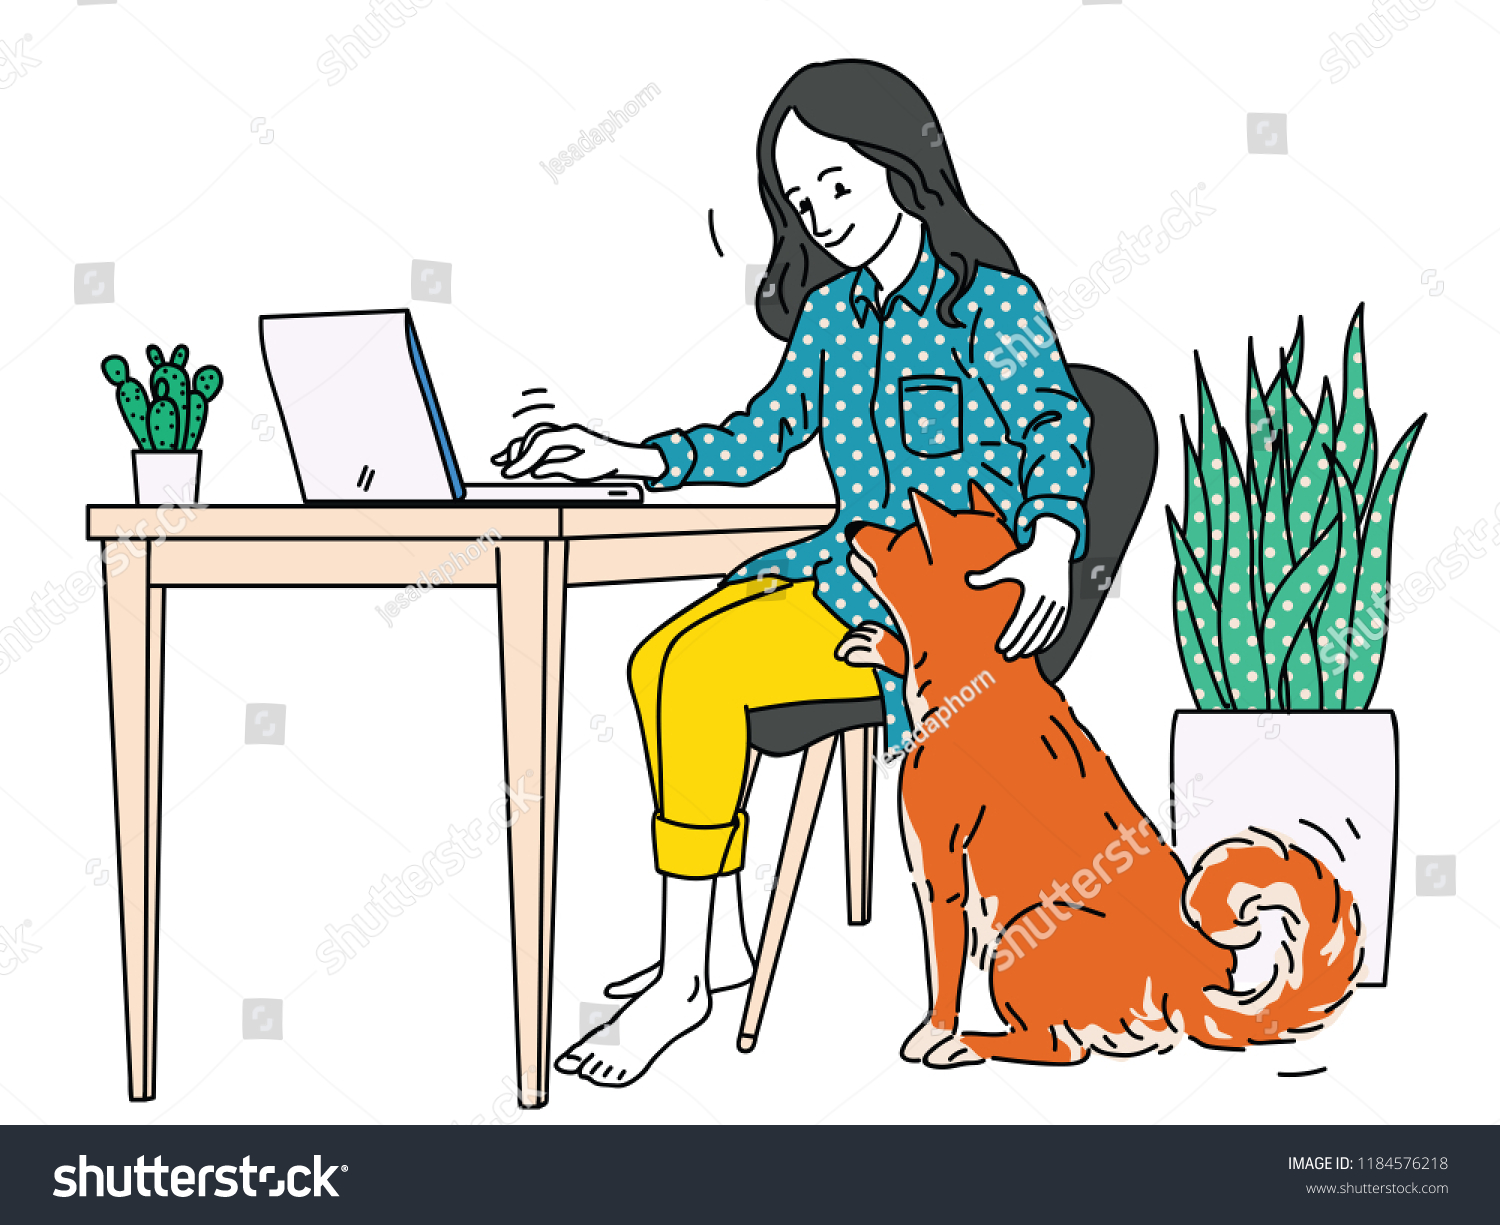 stock-vector-happy-woman-working-at-home-sitting-on-desk-with-typing-laptop-computer-enjoy-playing-with-her-1184576218